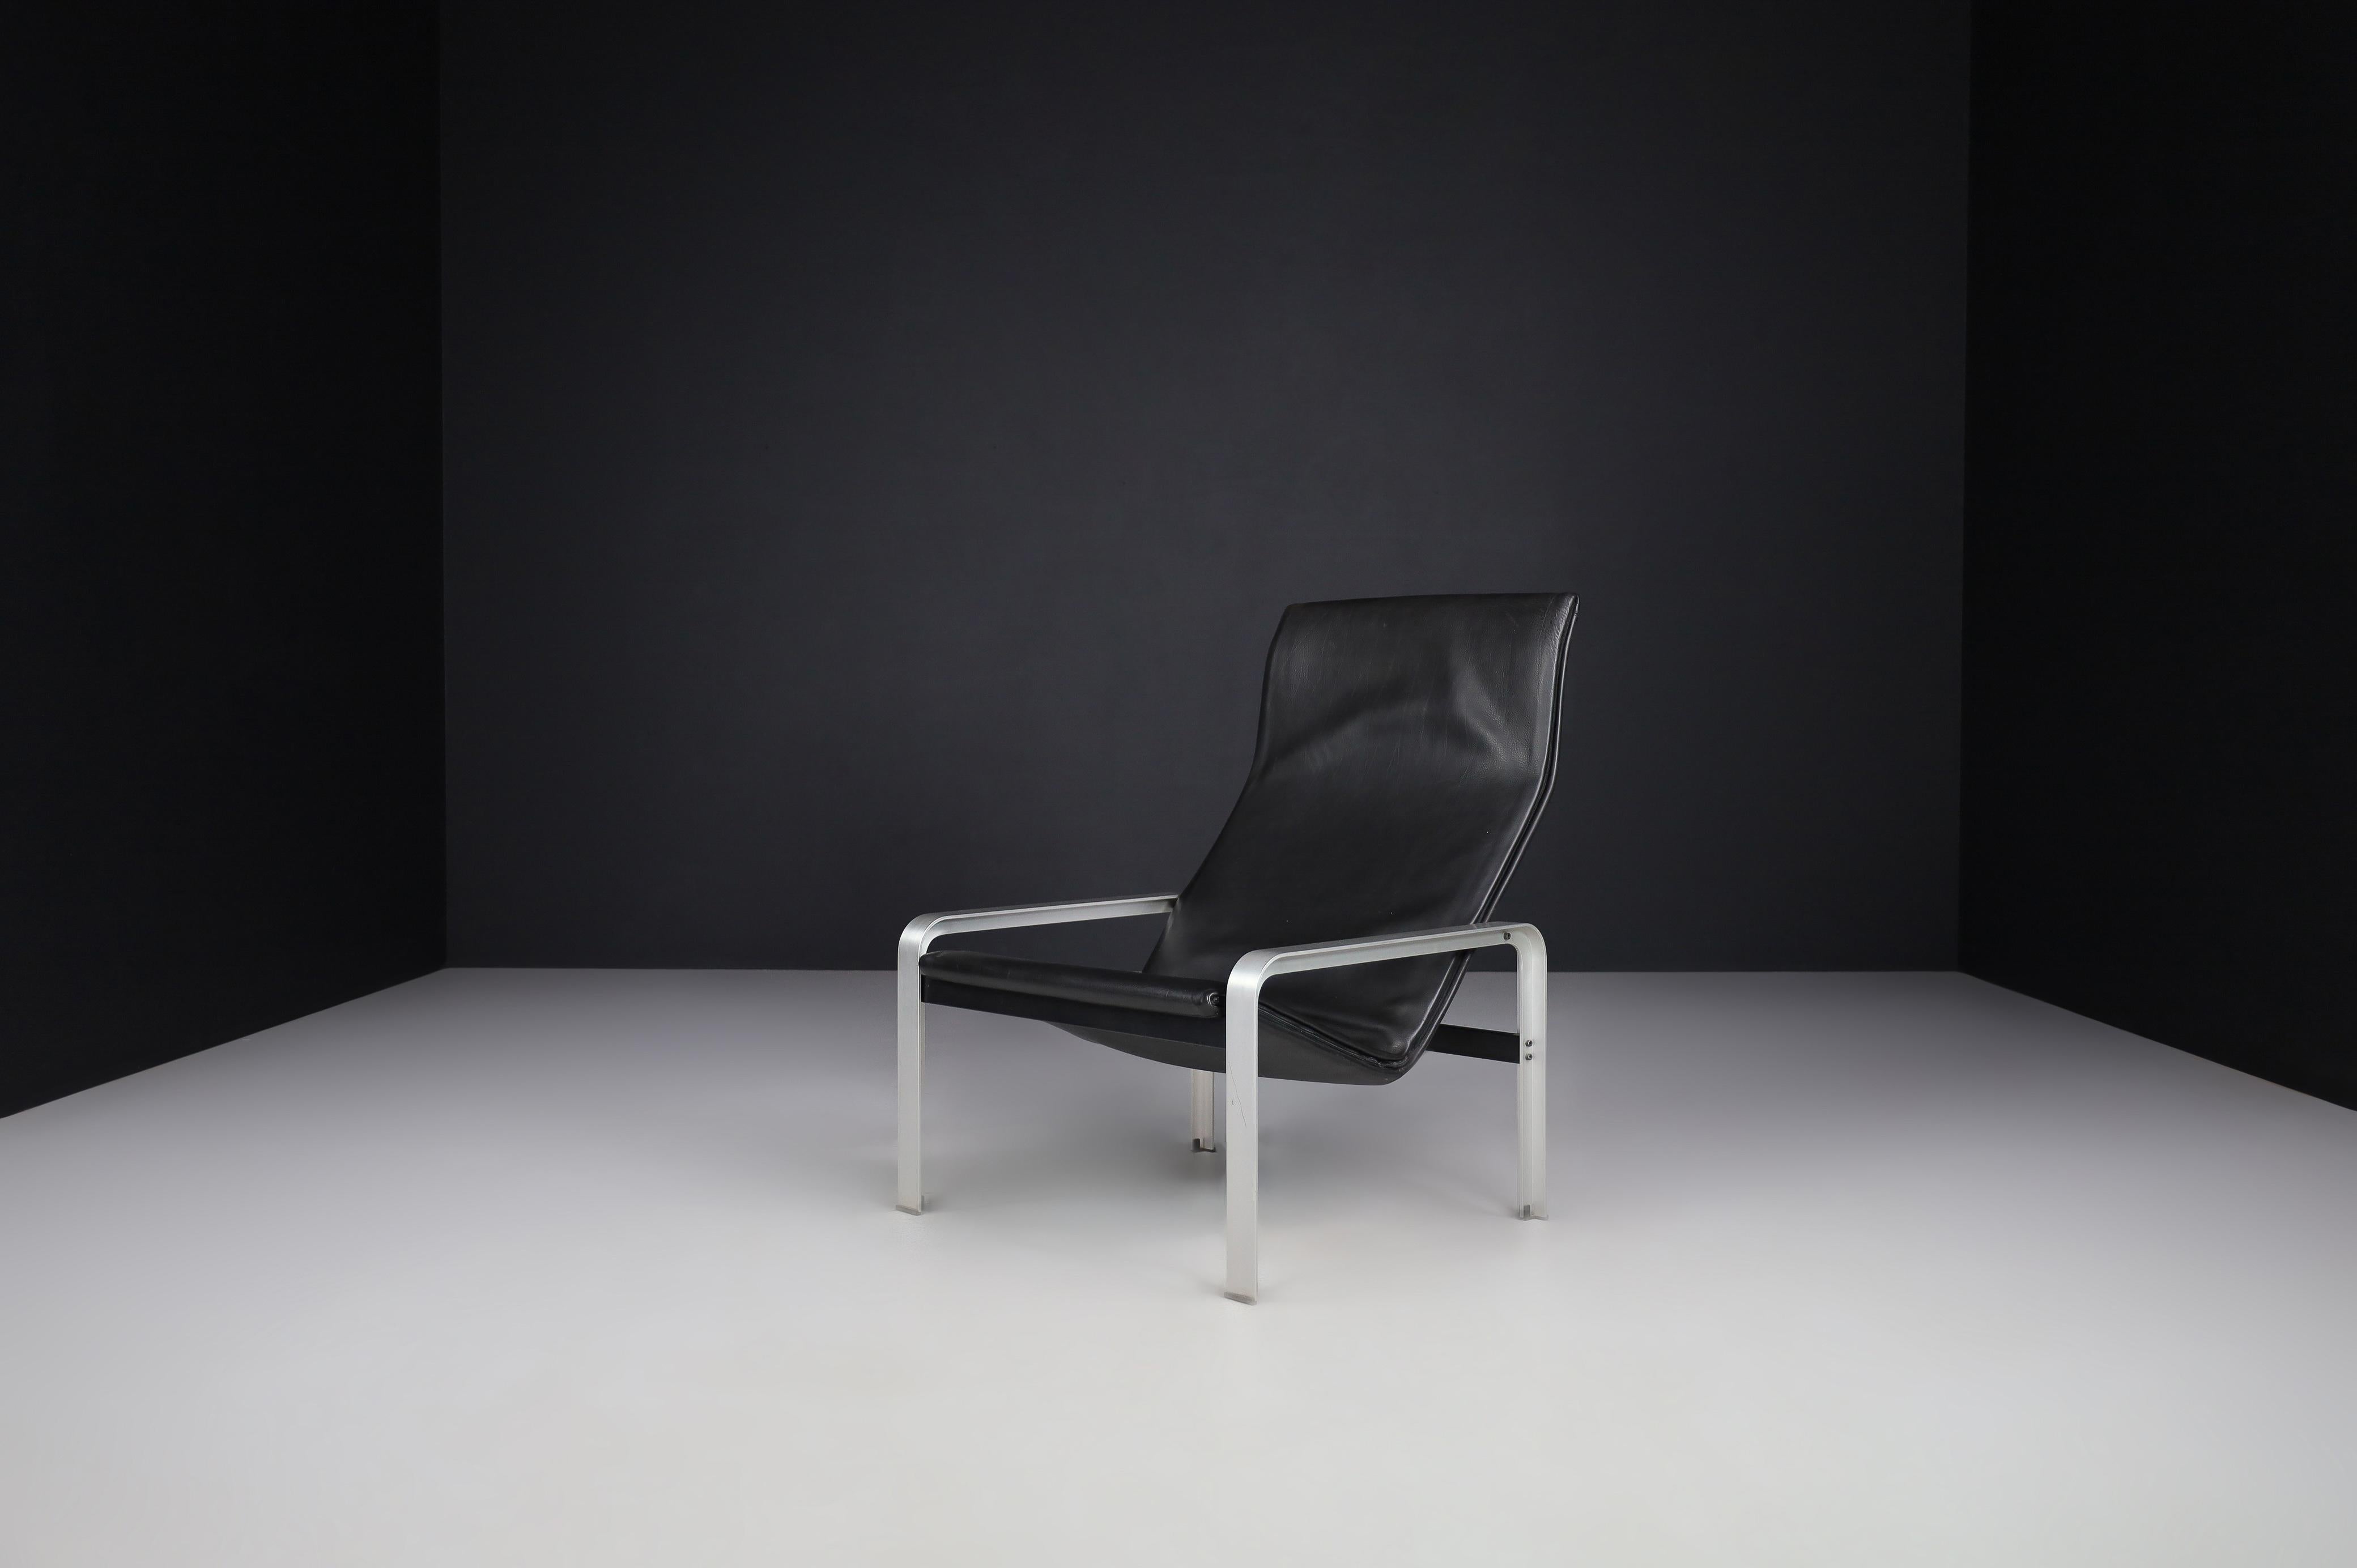 Matteo Grassi black leather lounge chair, Italy 1970s.

It is constructed of a metal frame covered with thick black saddle leather. Shows minor wear consistent with age. Extremely comfortable, chic, and highly indicative of the Italian 1970s